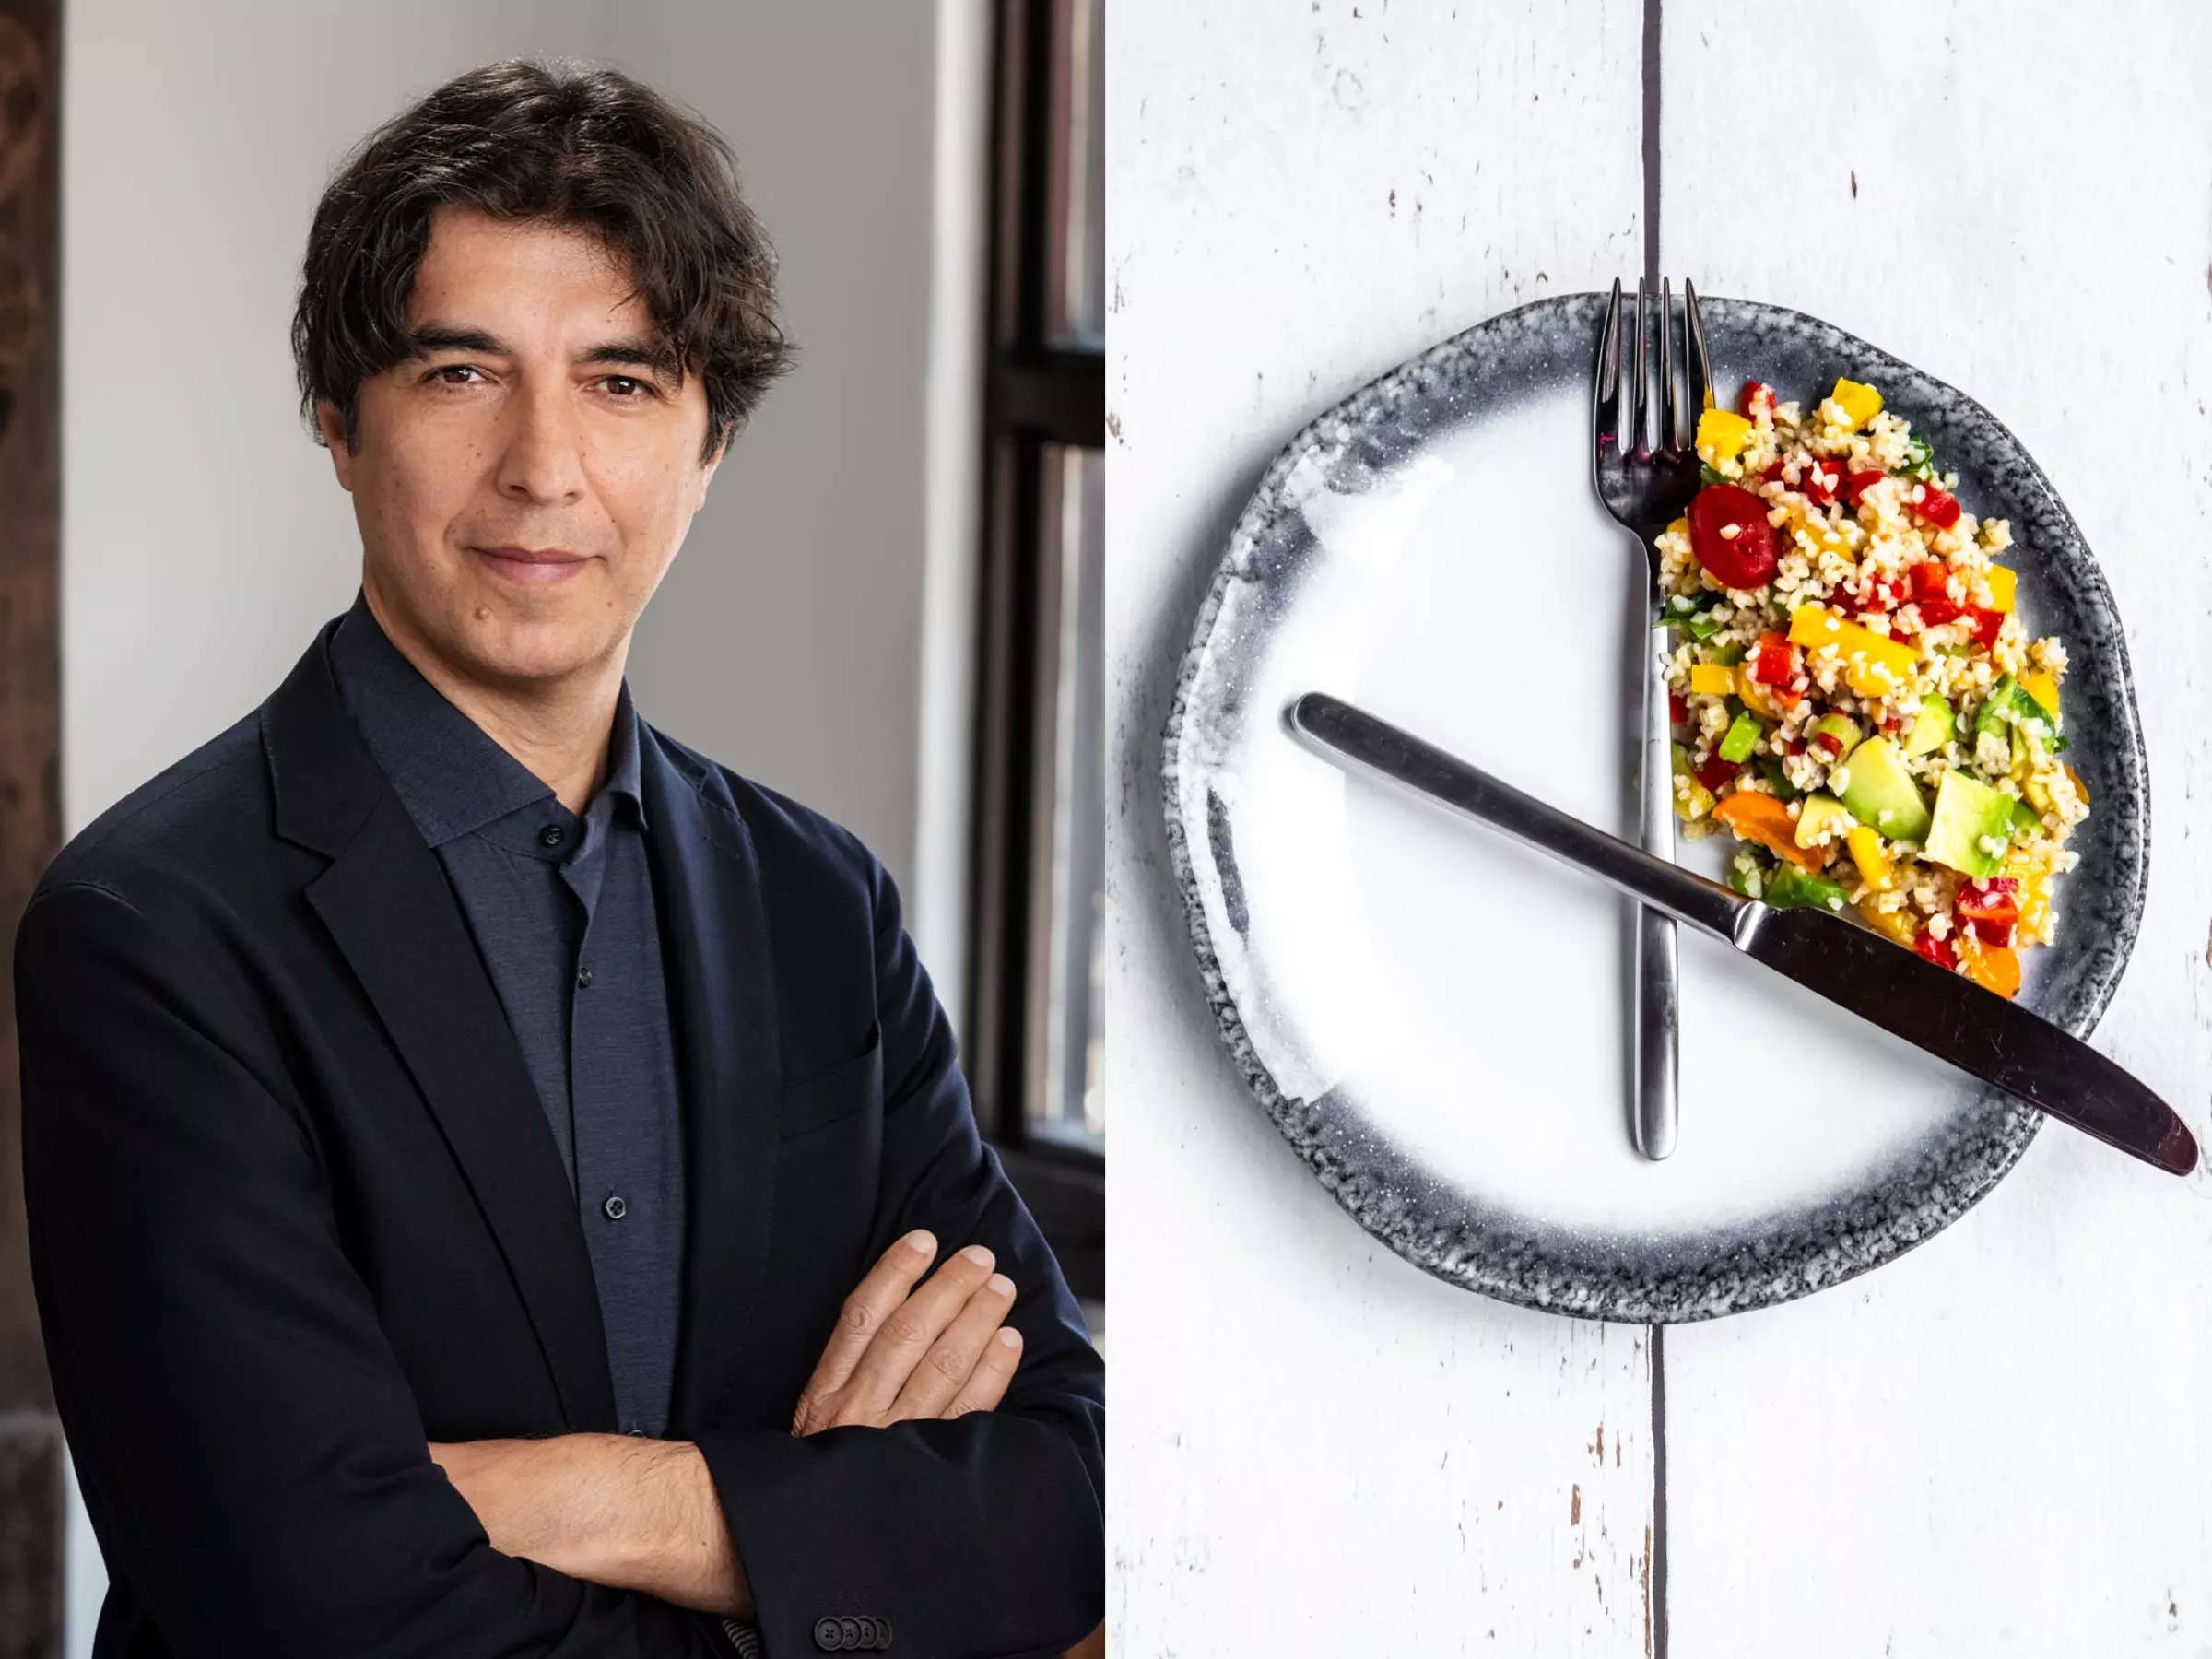 What does long-term diet researcher Walter Longo eat in a day to live longer?